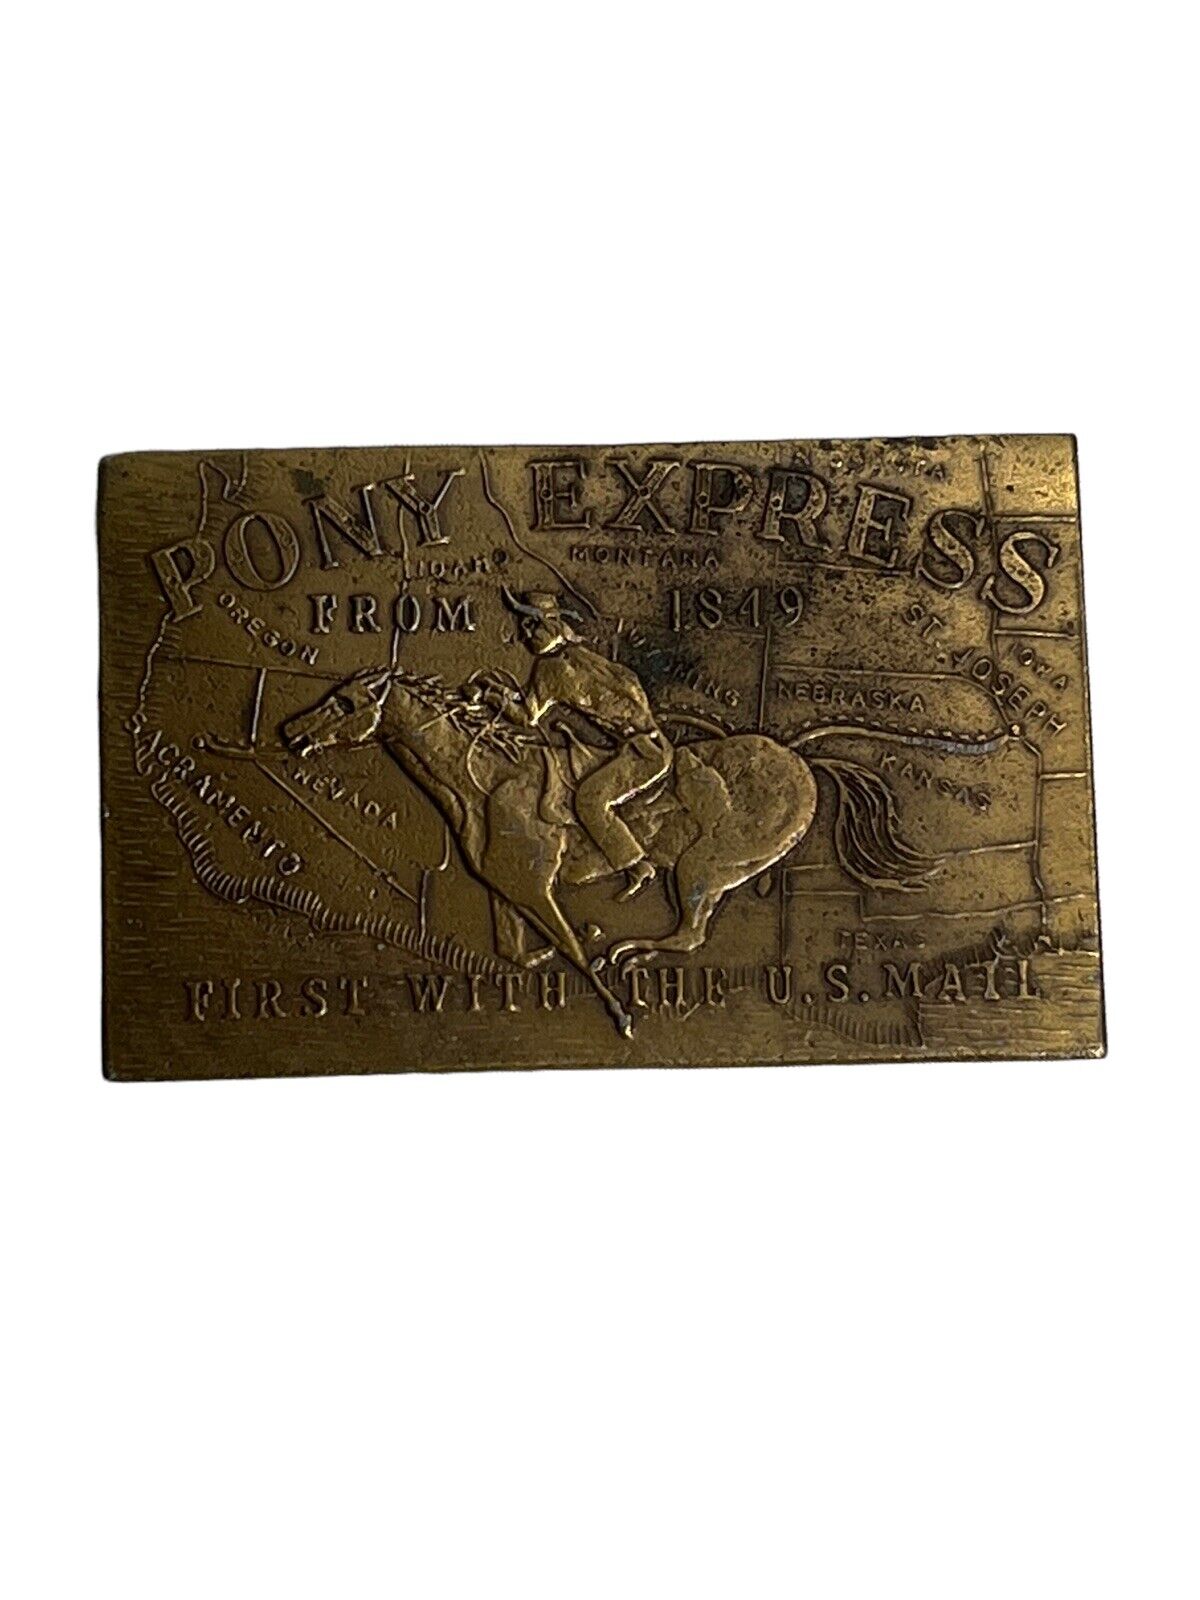 VTG PONY EXPRESS 1849 BRASS BELT BUCKLE FIRST WITH THE U.S. MAIL Map Background